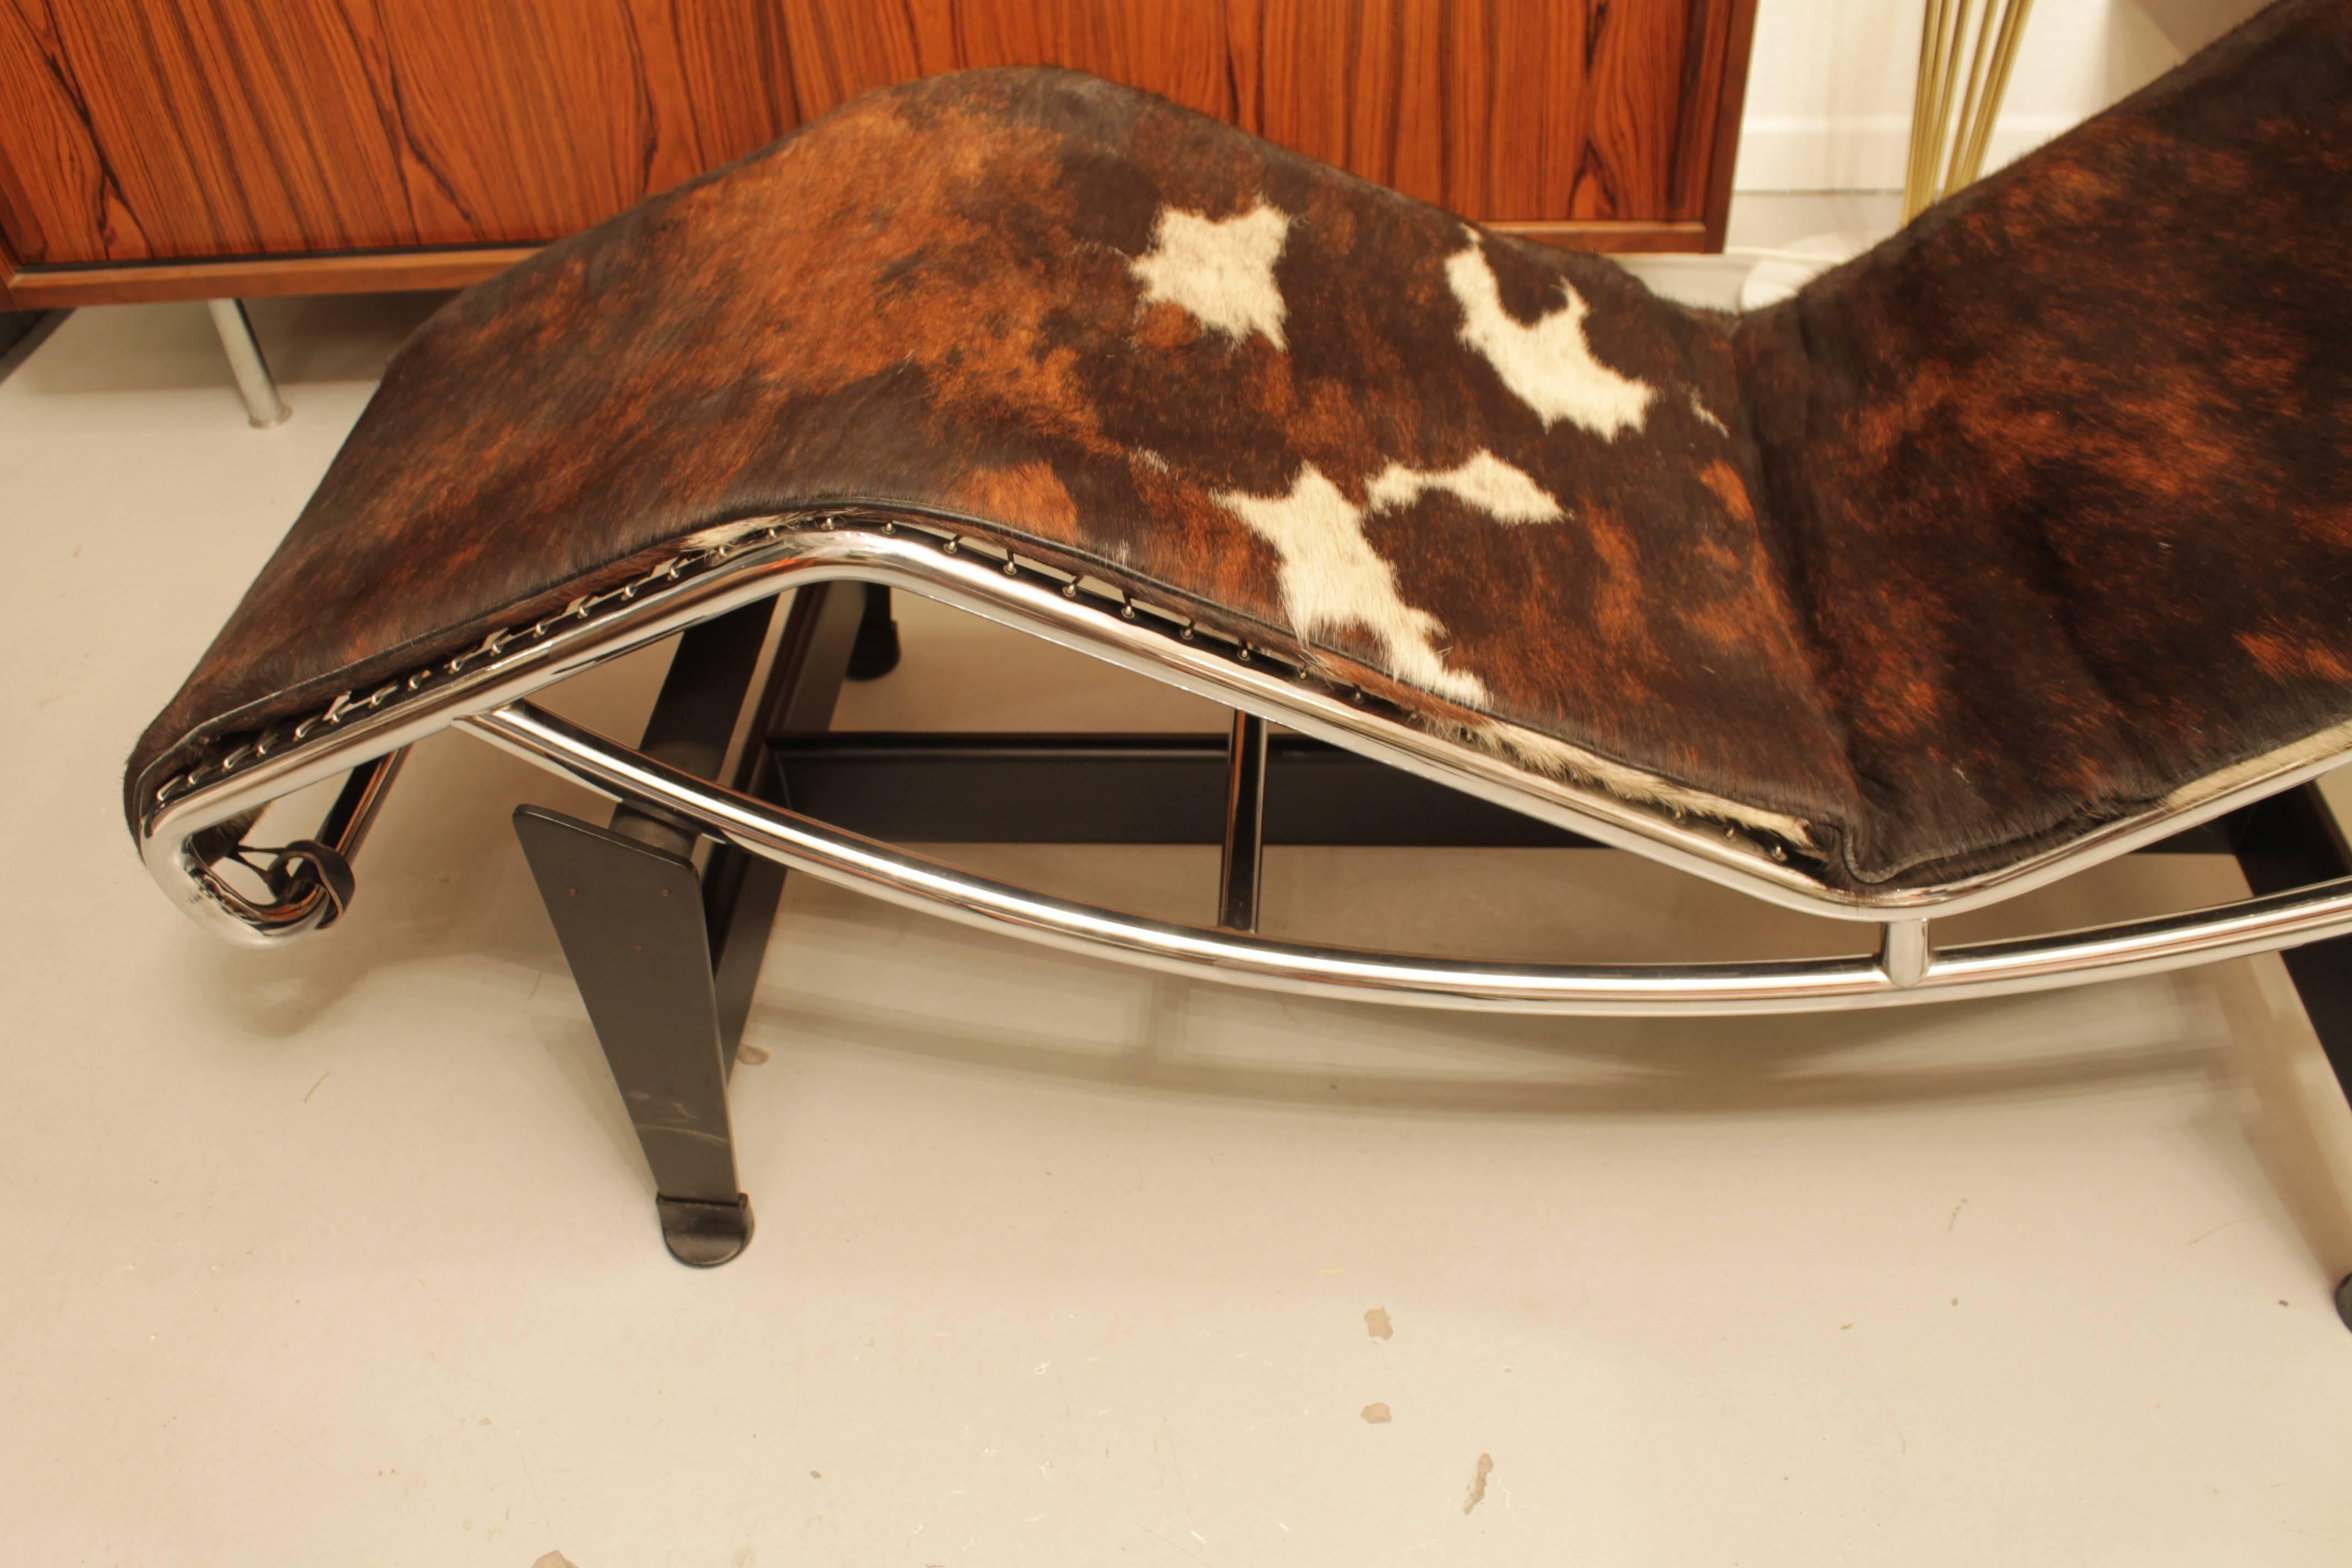 Lc4 lounge chair by Le Corbusier in Cow Skin, produced by Cassina Italy ca.1980
Perfect condition